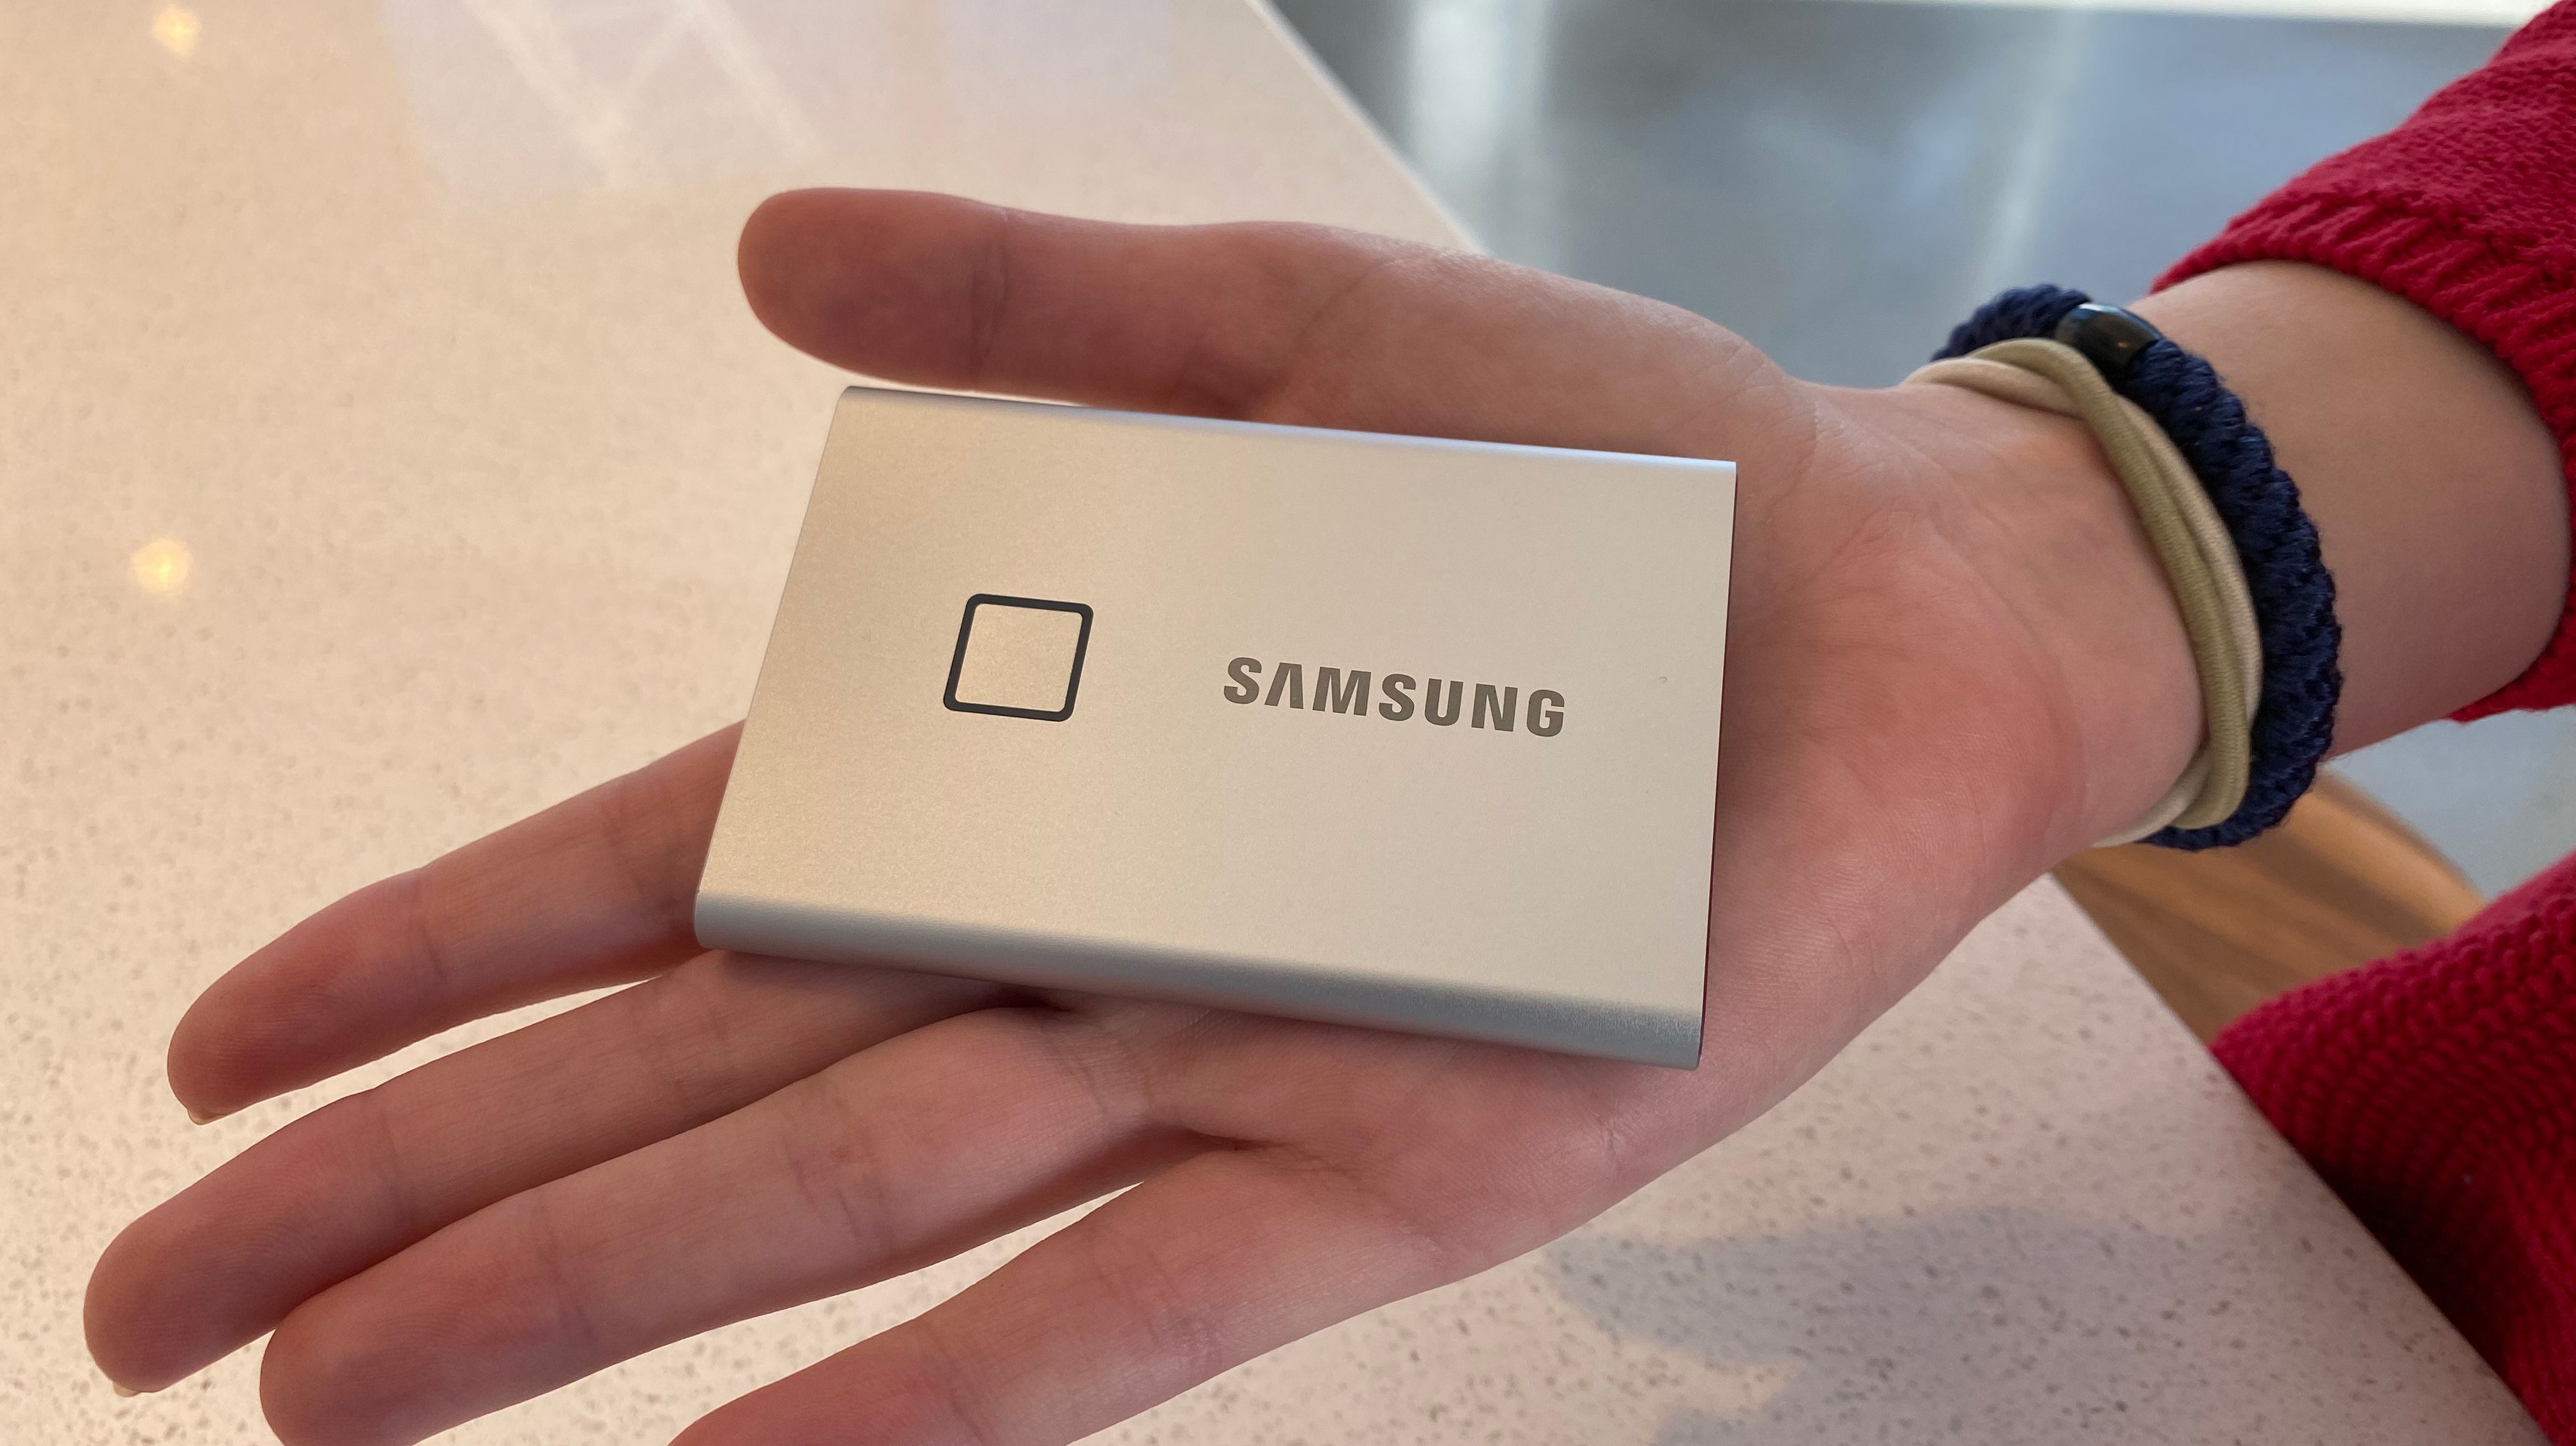 Samsung T7 Touch Portable SSD Review